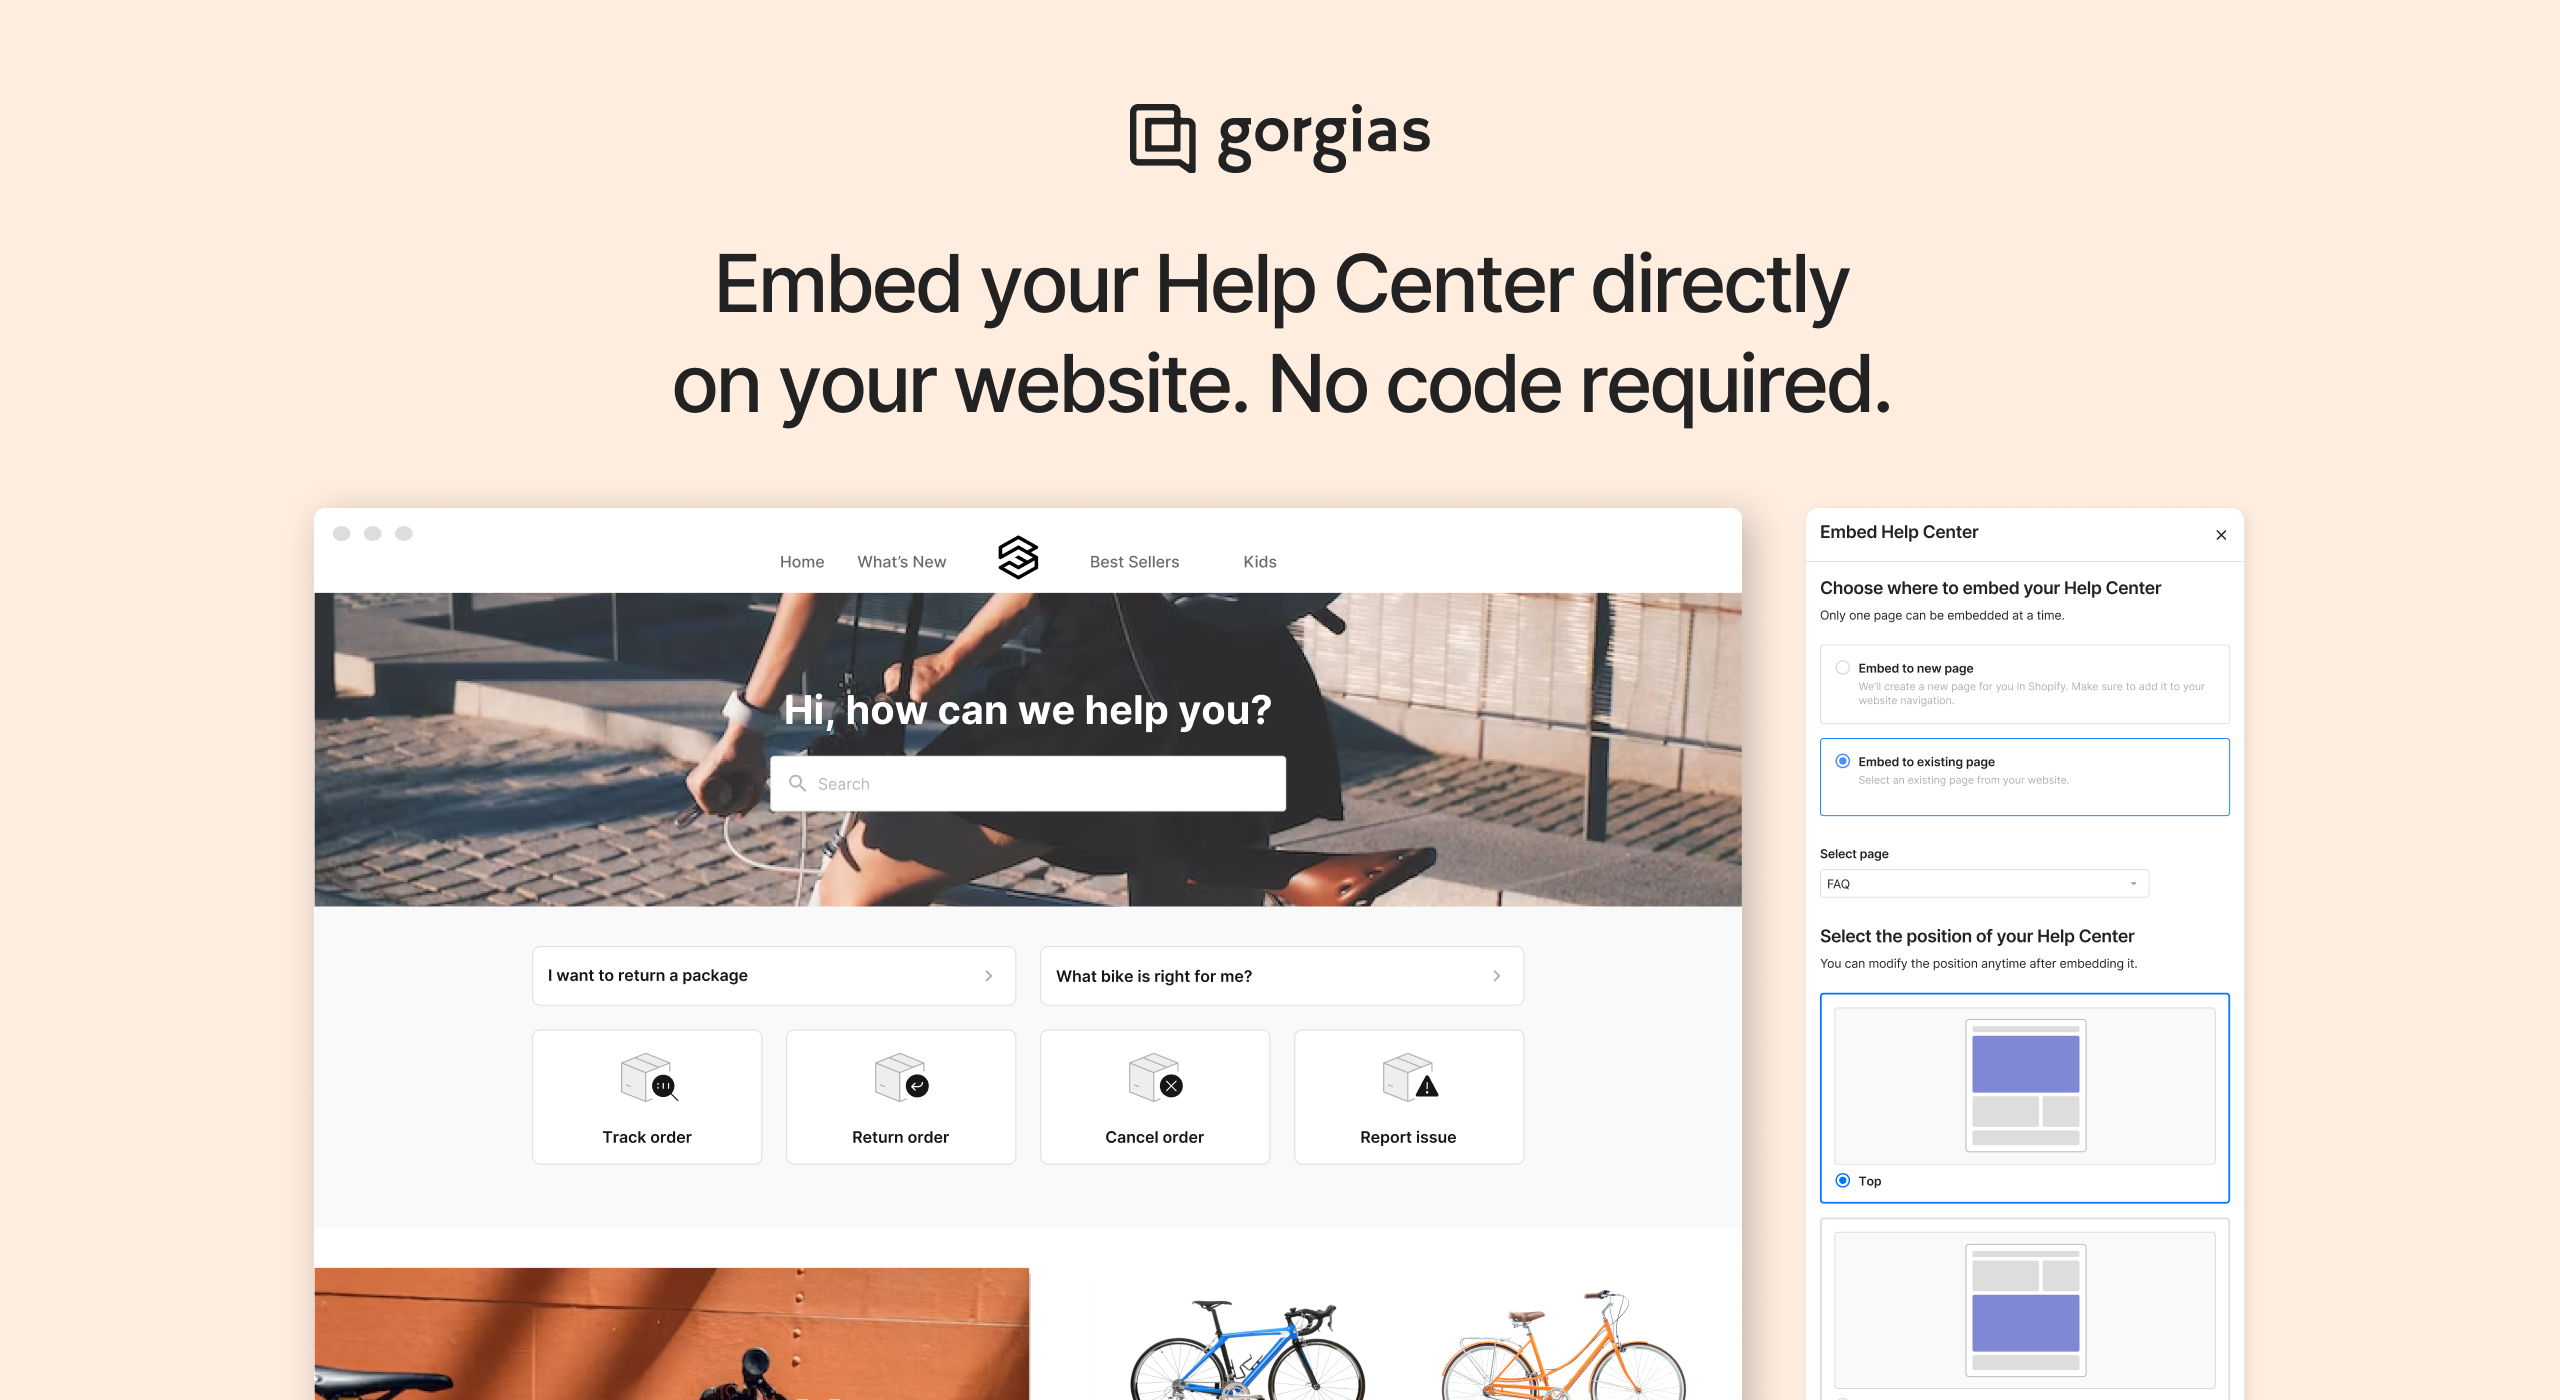 Major upgrade: Easily embed a Help Center on your website!